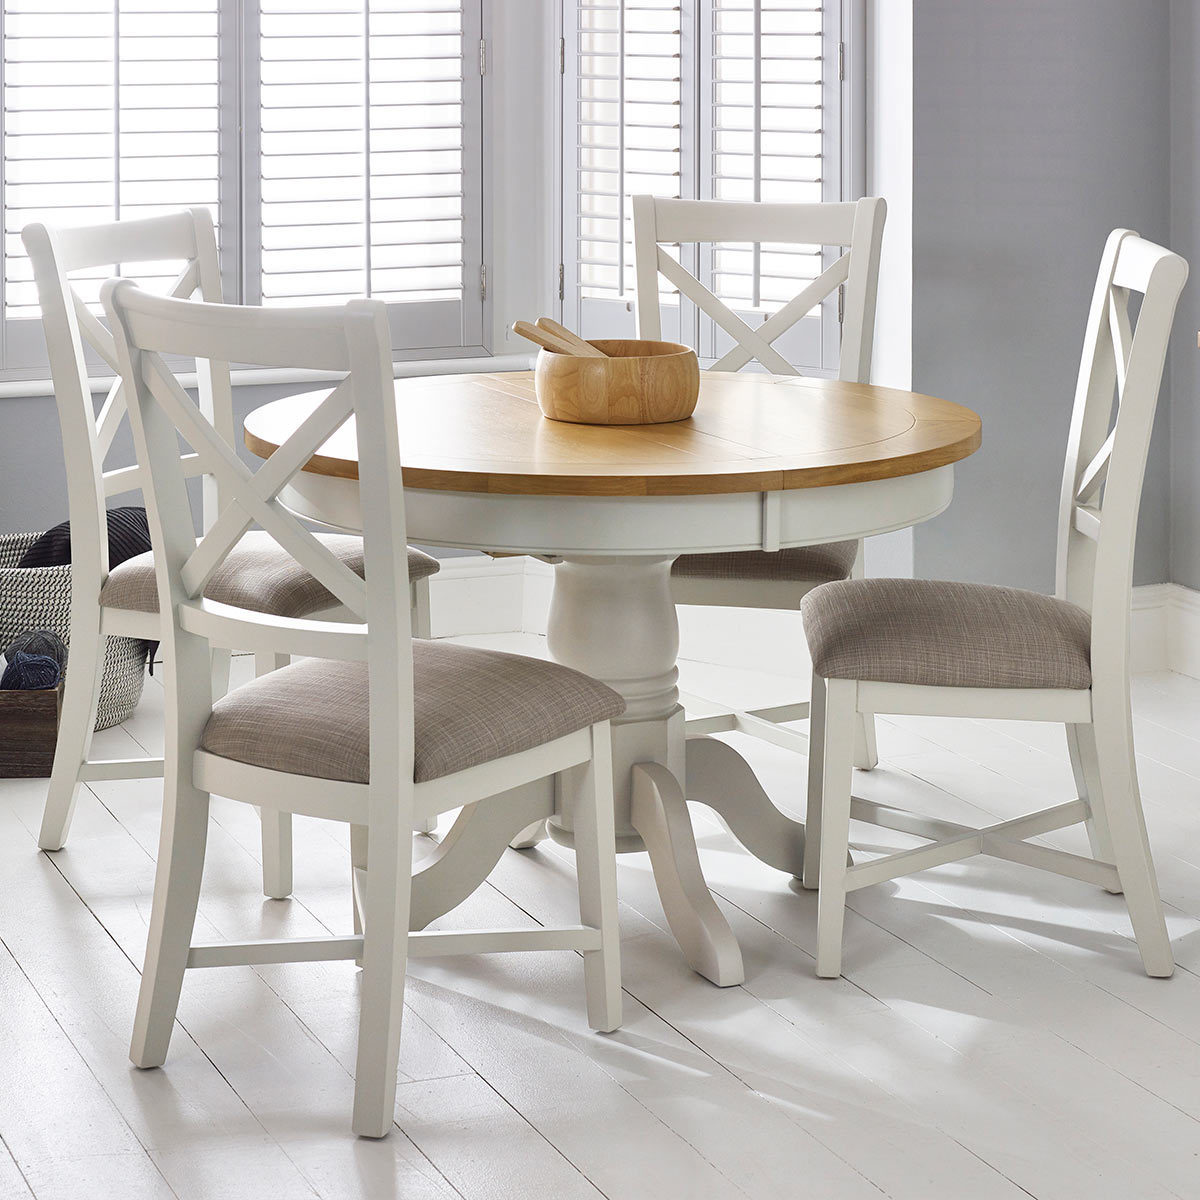 Use a round extendable dining table to save space in your dining room